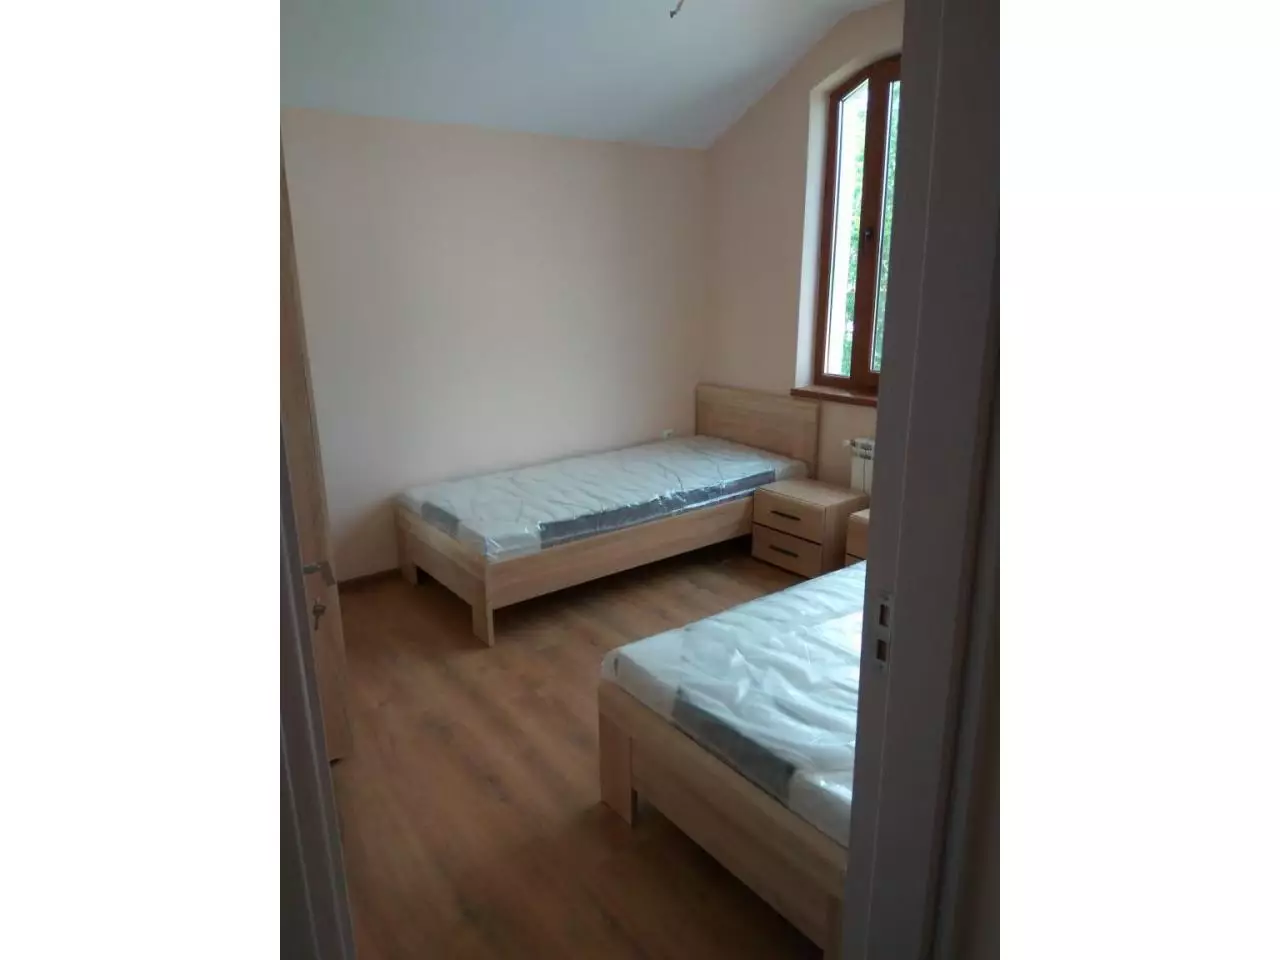 For sale a new house with an area of 370 sq.m. in the Bulgarian - 12/12